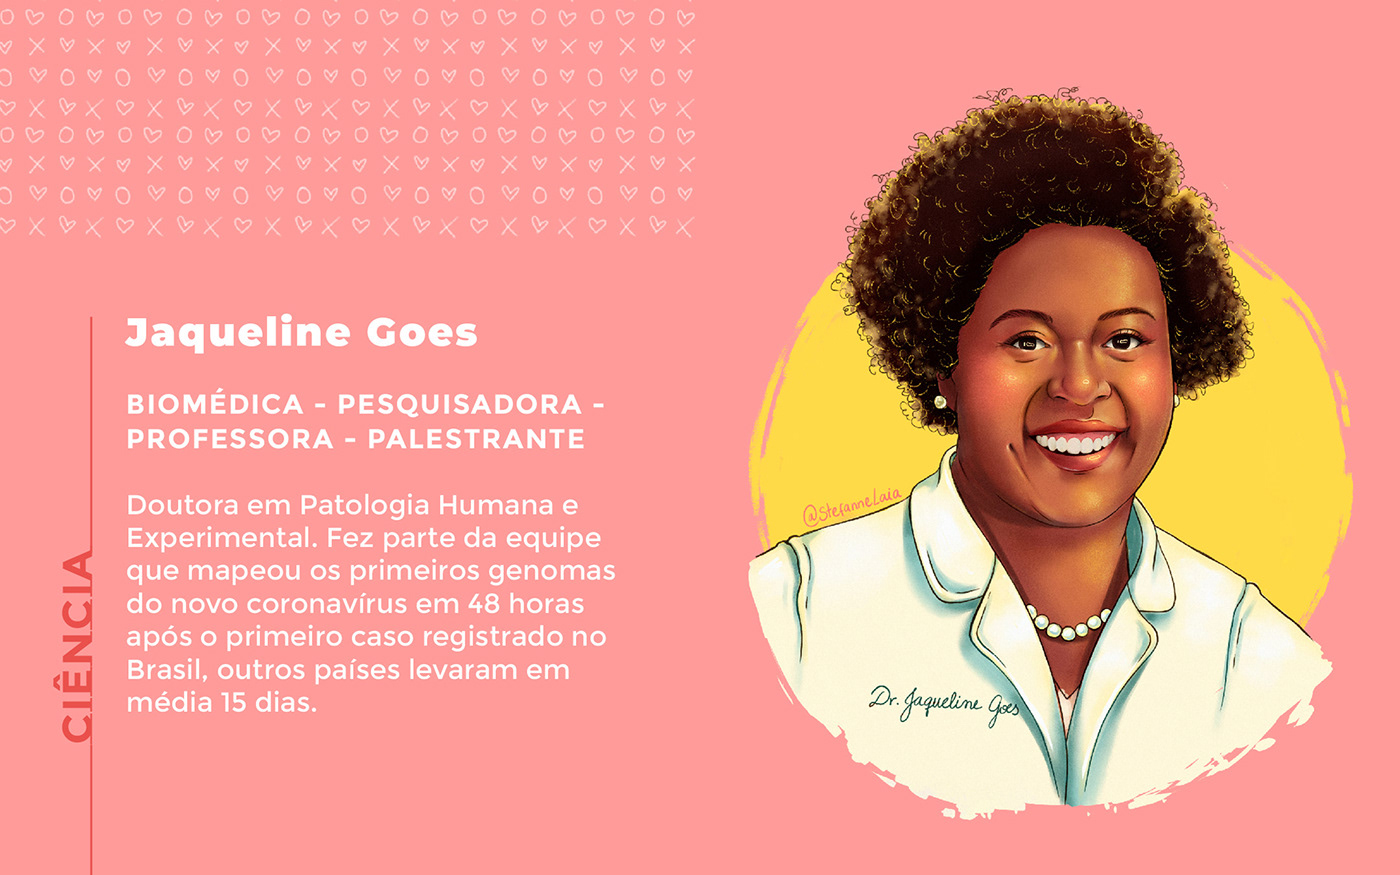 An illustrated portrait of Jaqueline Goes a brazilian biomedic and researcher.